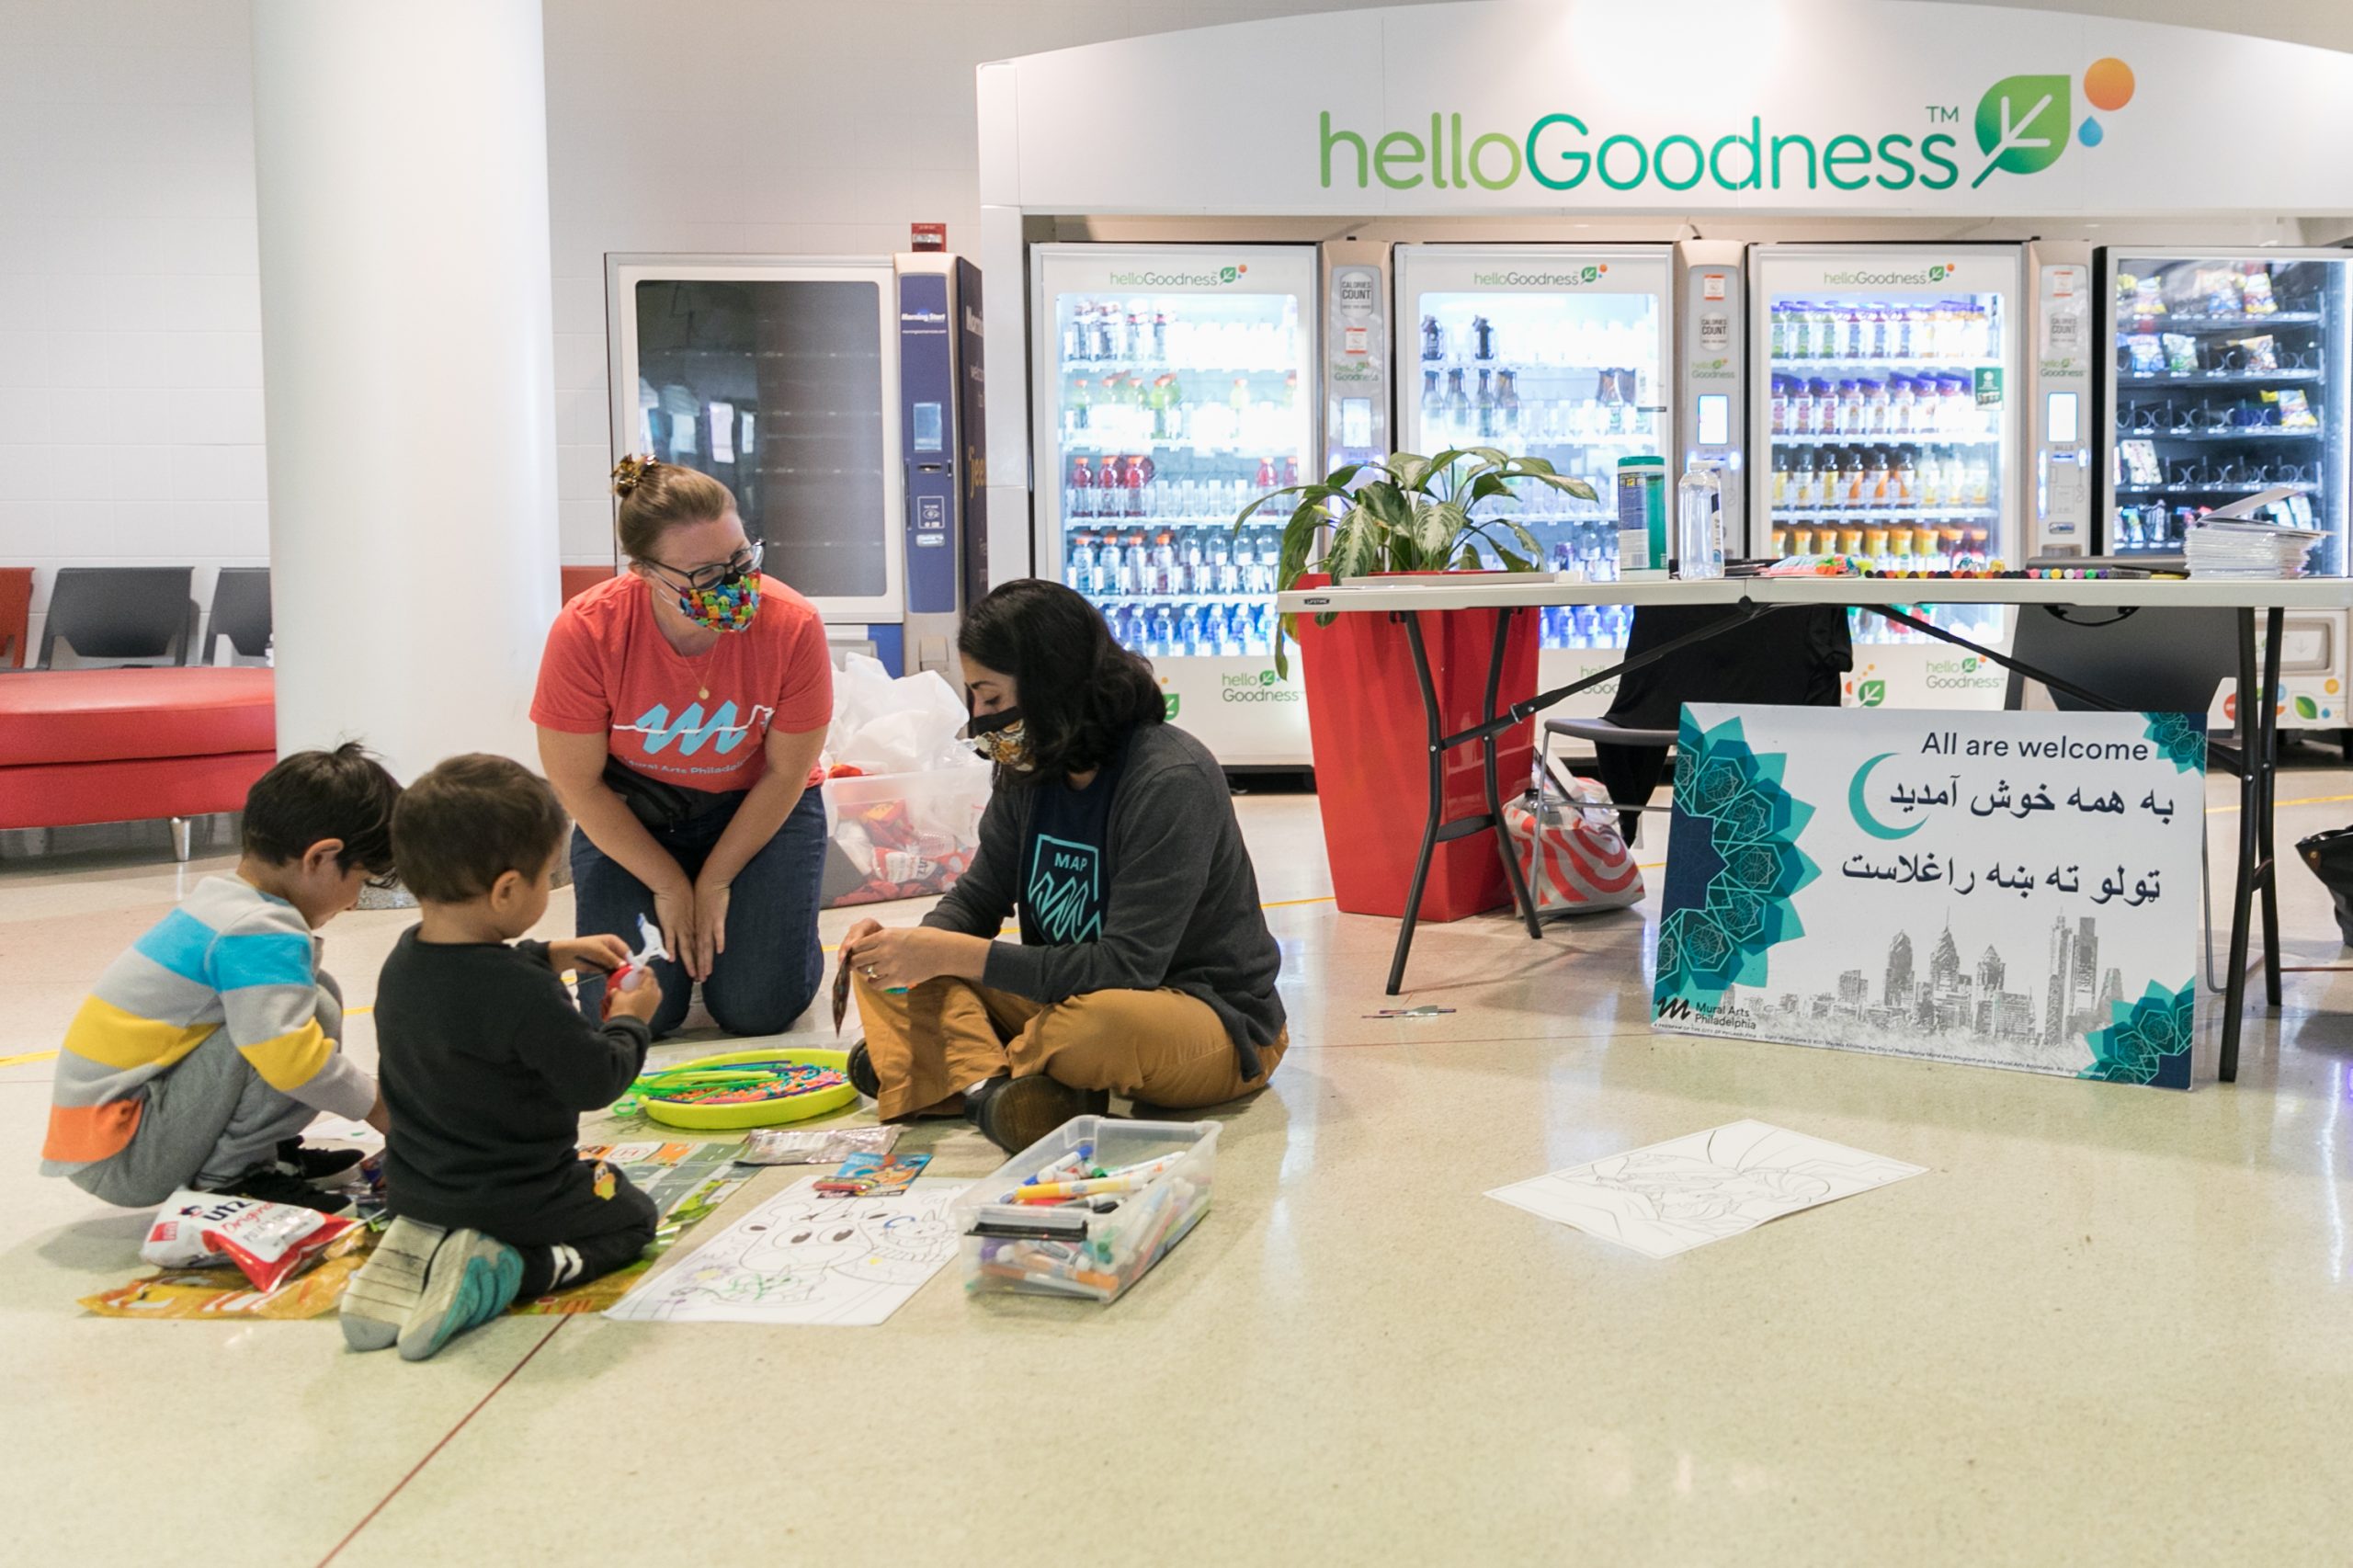 Two Porch Light staff members sit on the floor with two young children, surrounded by papers and markers and a sign that says All Are Welcome in English, Pashto and Farsi at the airport.